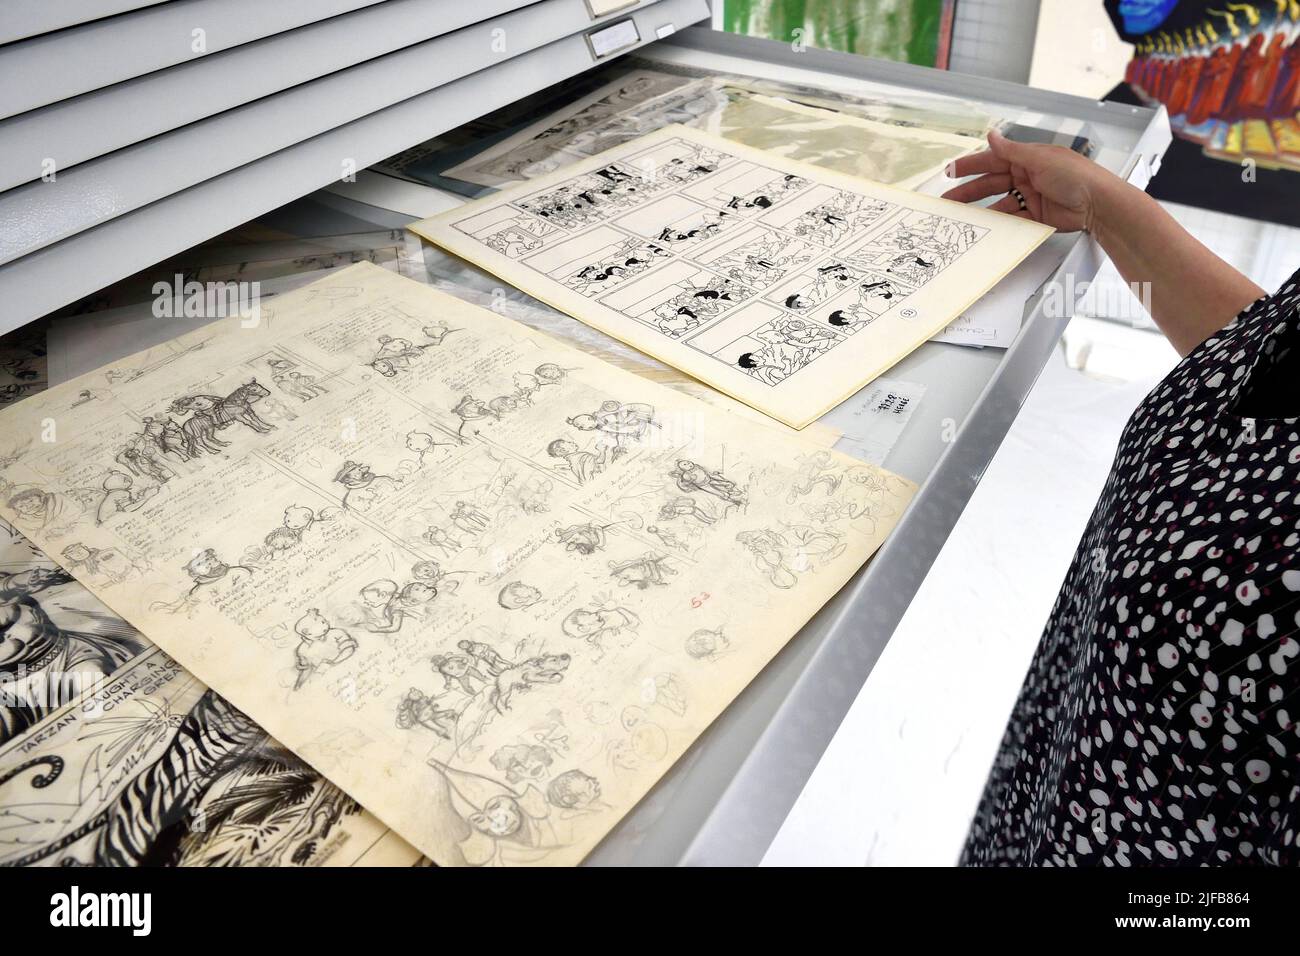 France, Charente, Angouleme, Cité internationale de la bande dessinée et de l'image (CIBDI)(International city of comics and images), in the reserves of the comic museum, original pencil sketch of Tintin in Tibet by Hergé on the left and inking on the right Stock Photo